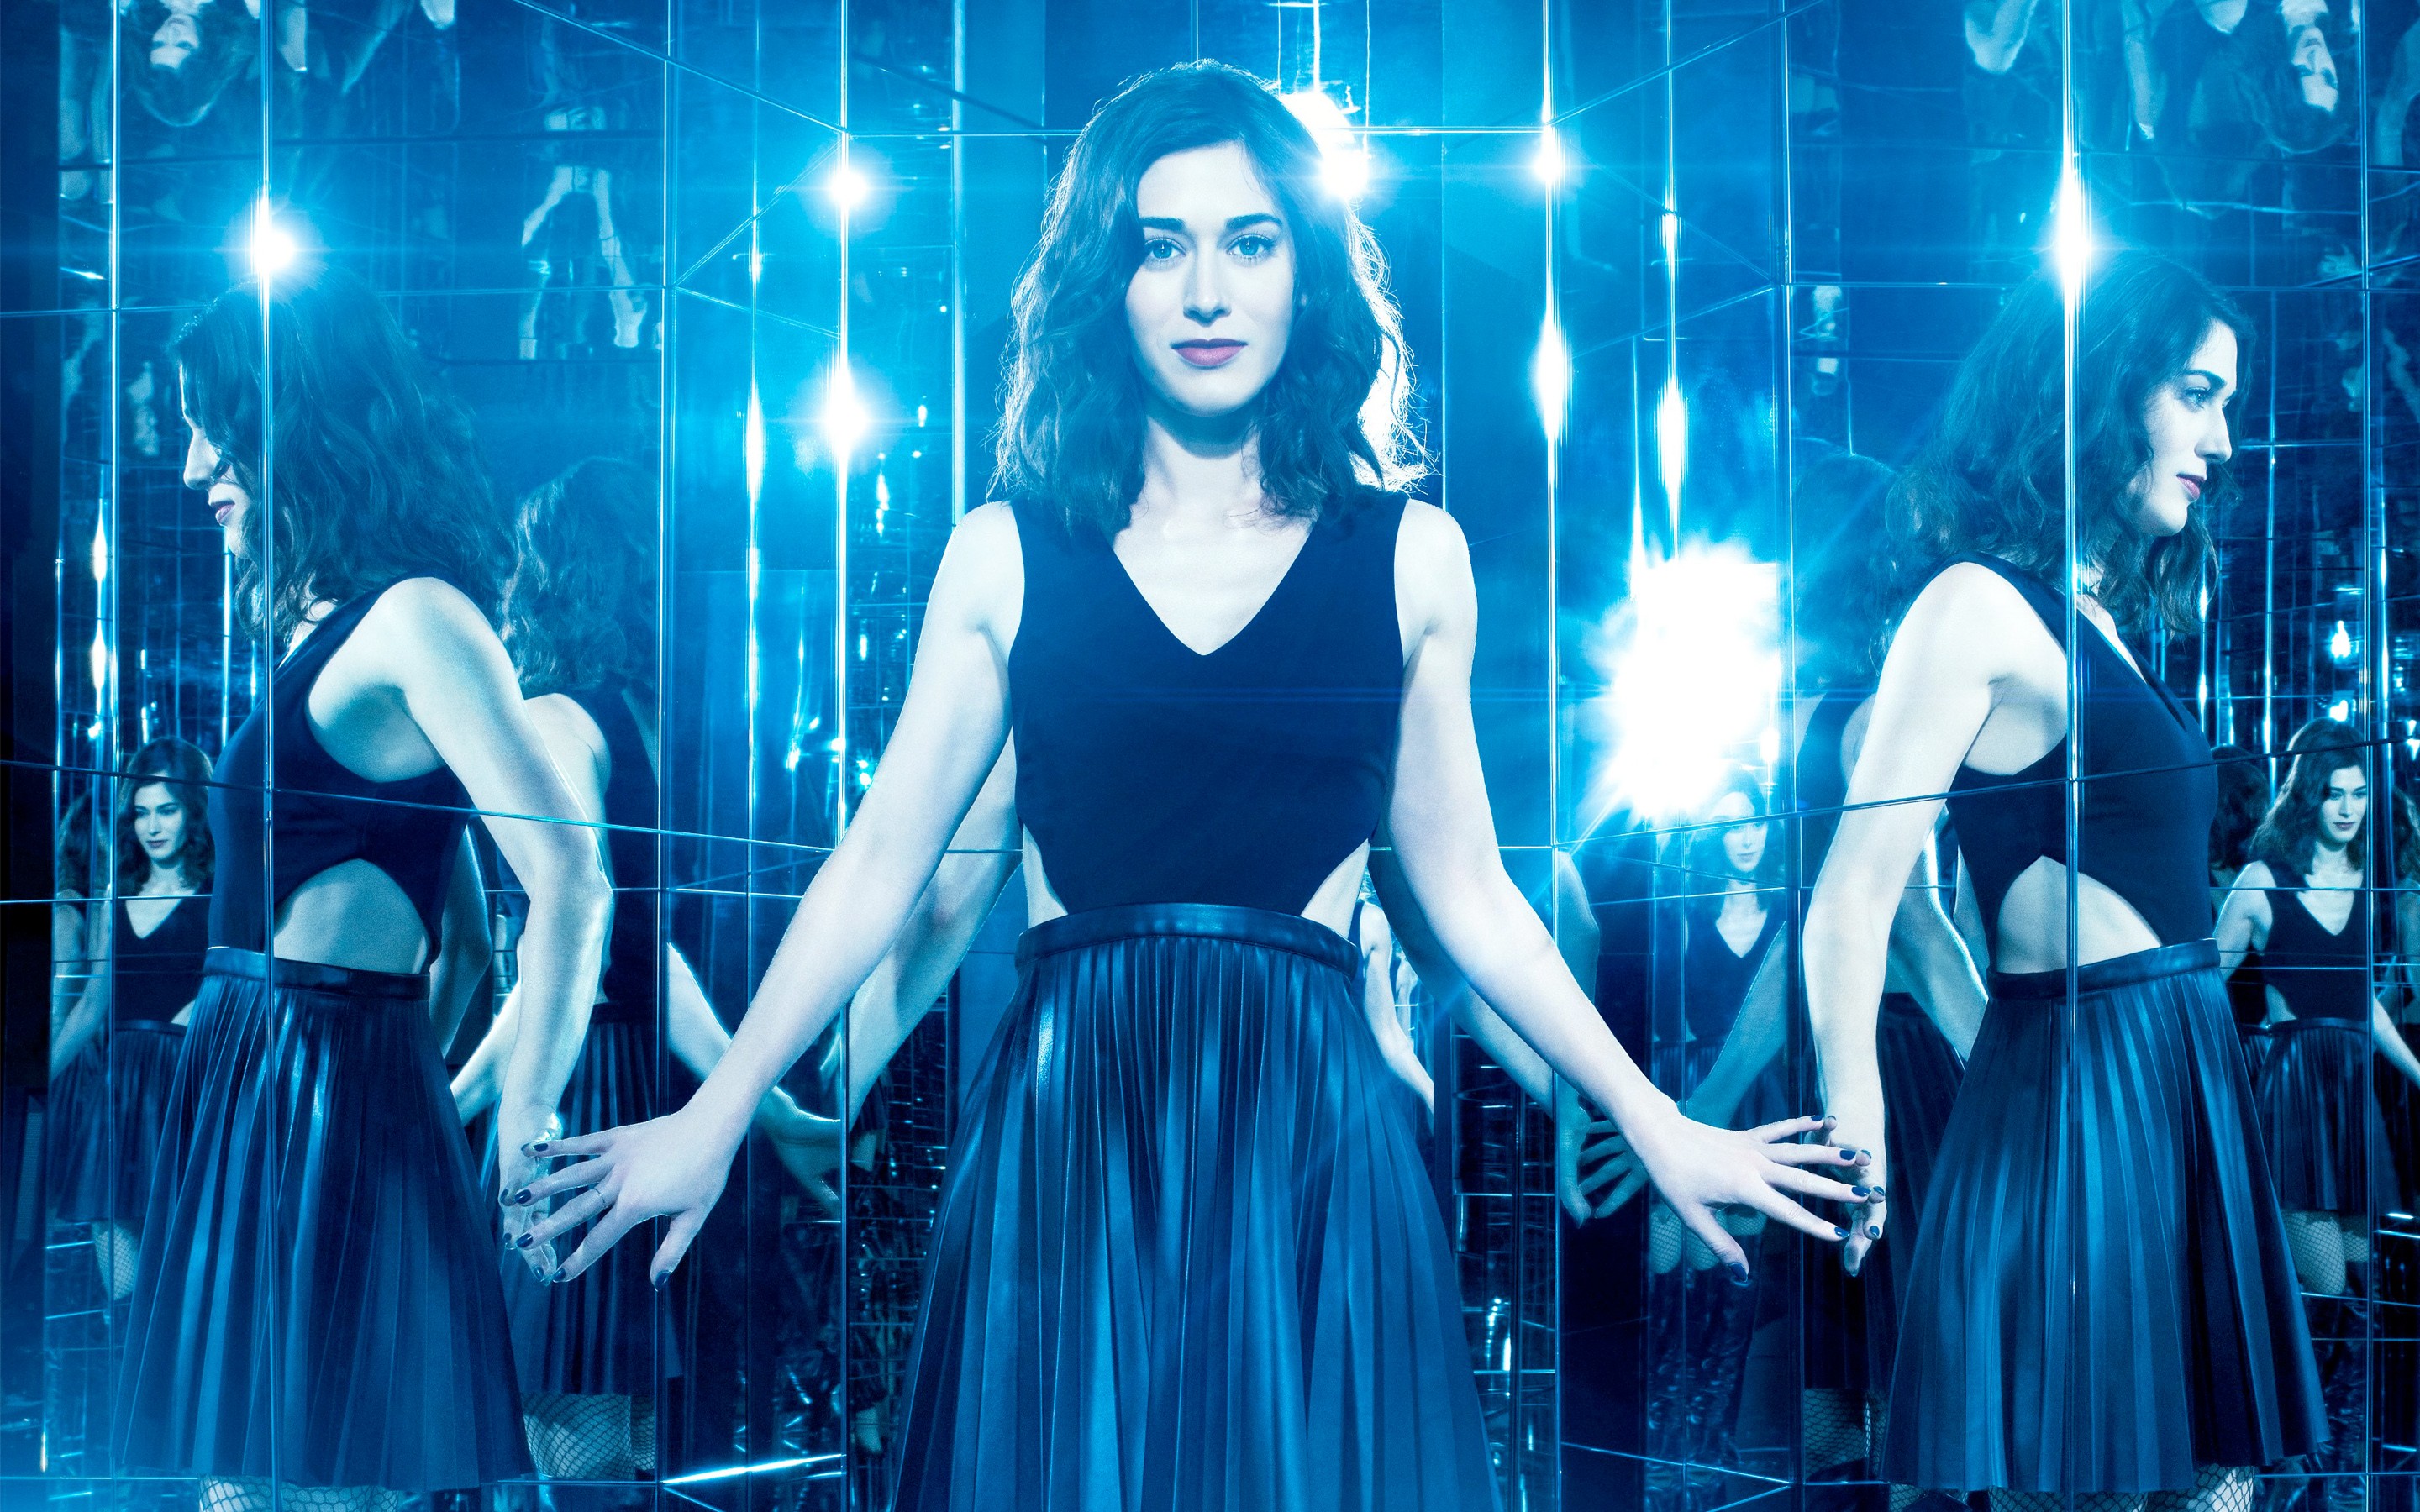 now you see me wallpaper,blue,musical,performance,fashion,dress